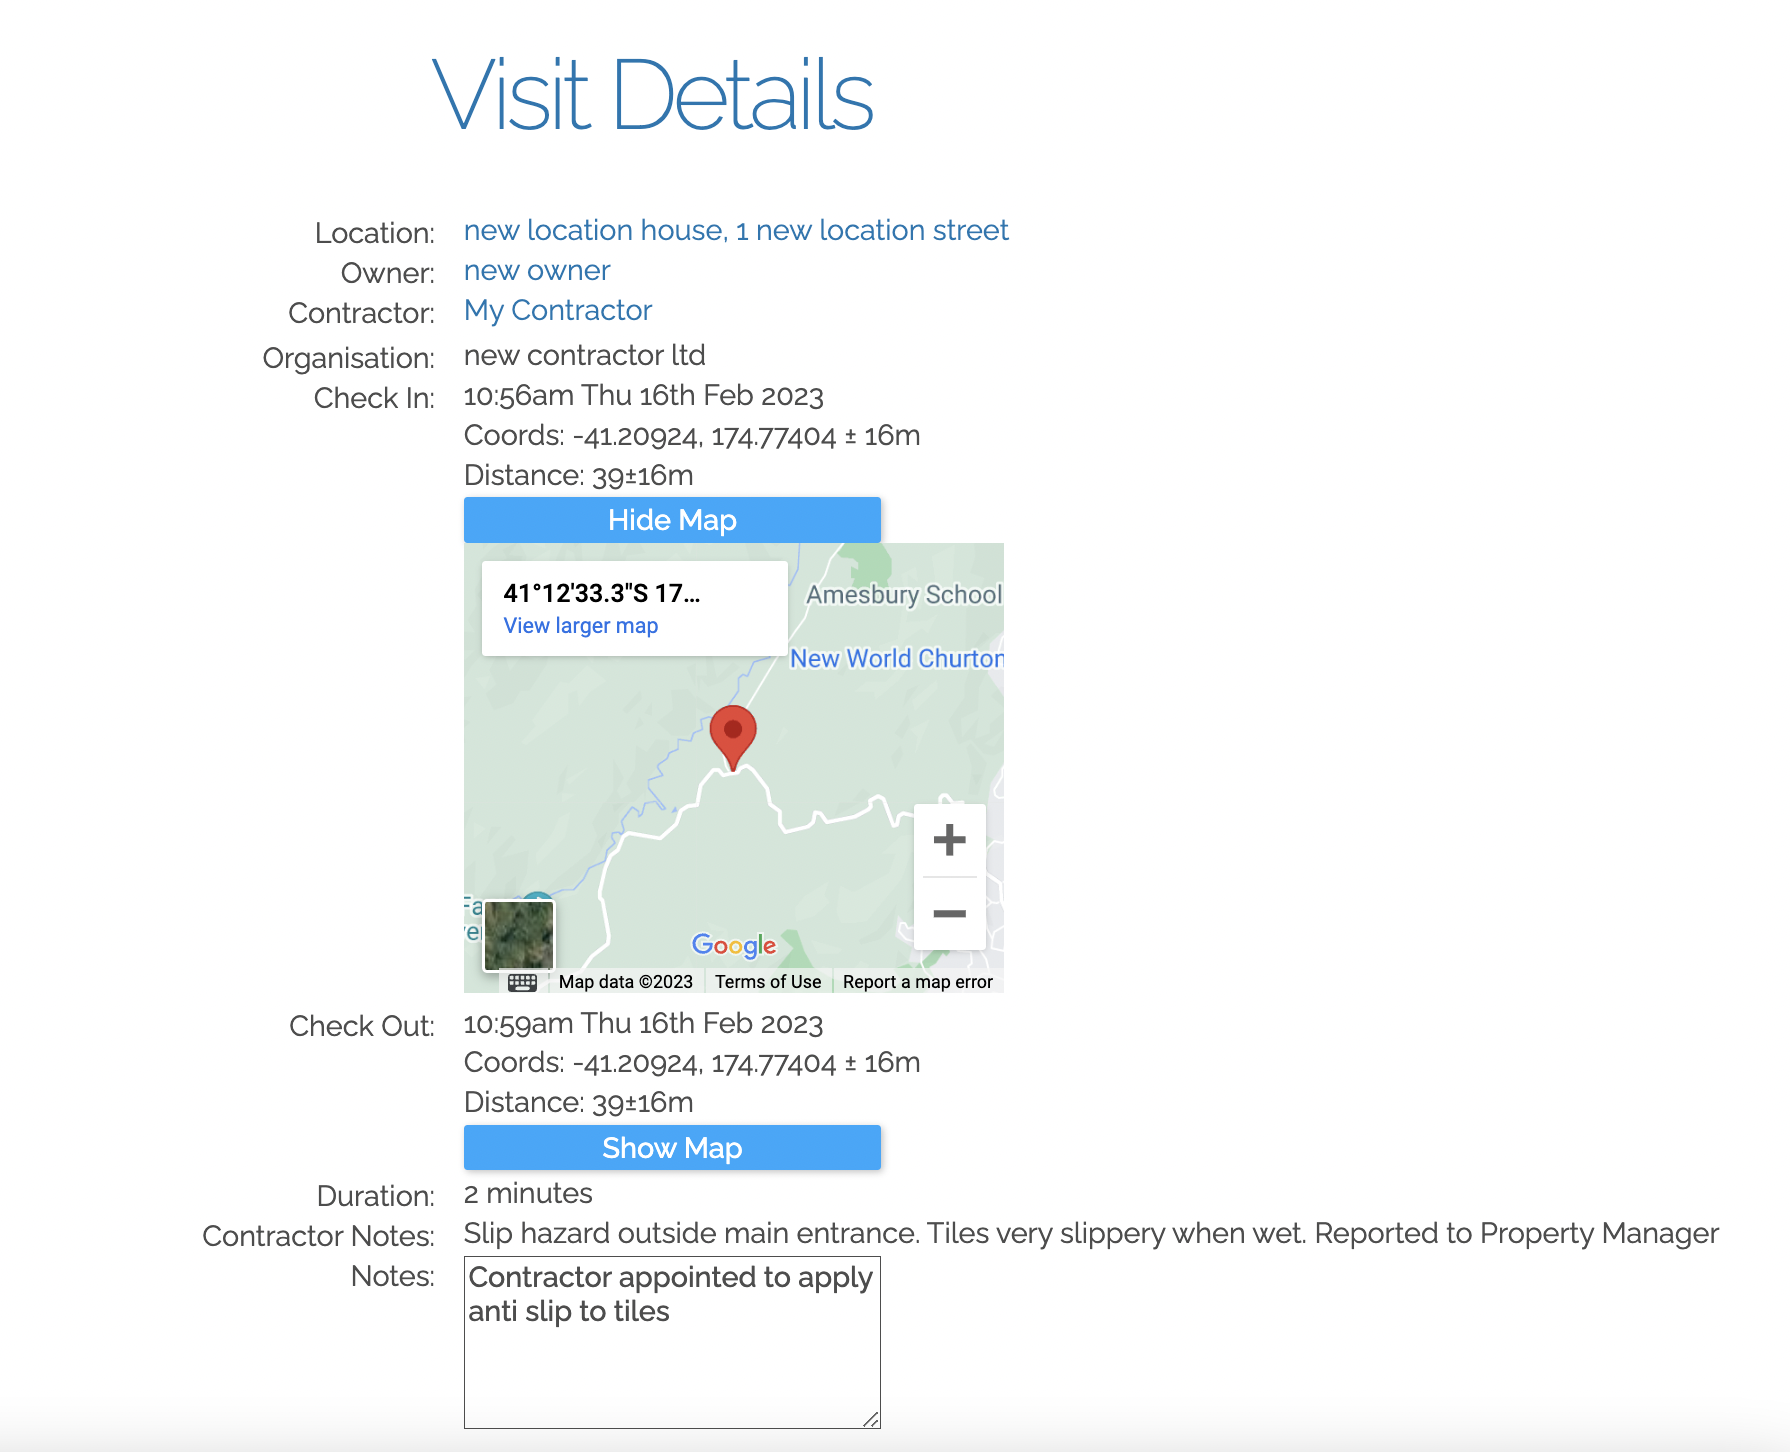 A screenshot showing full details of one specific visit, including map of recorded location.